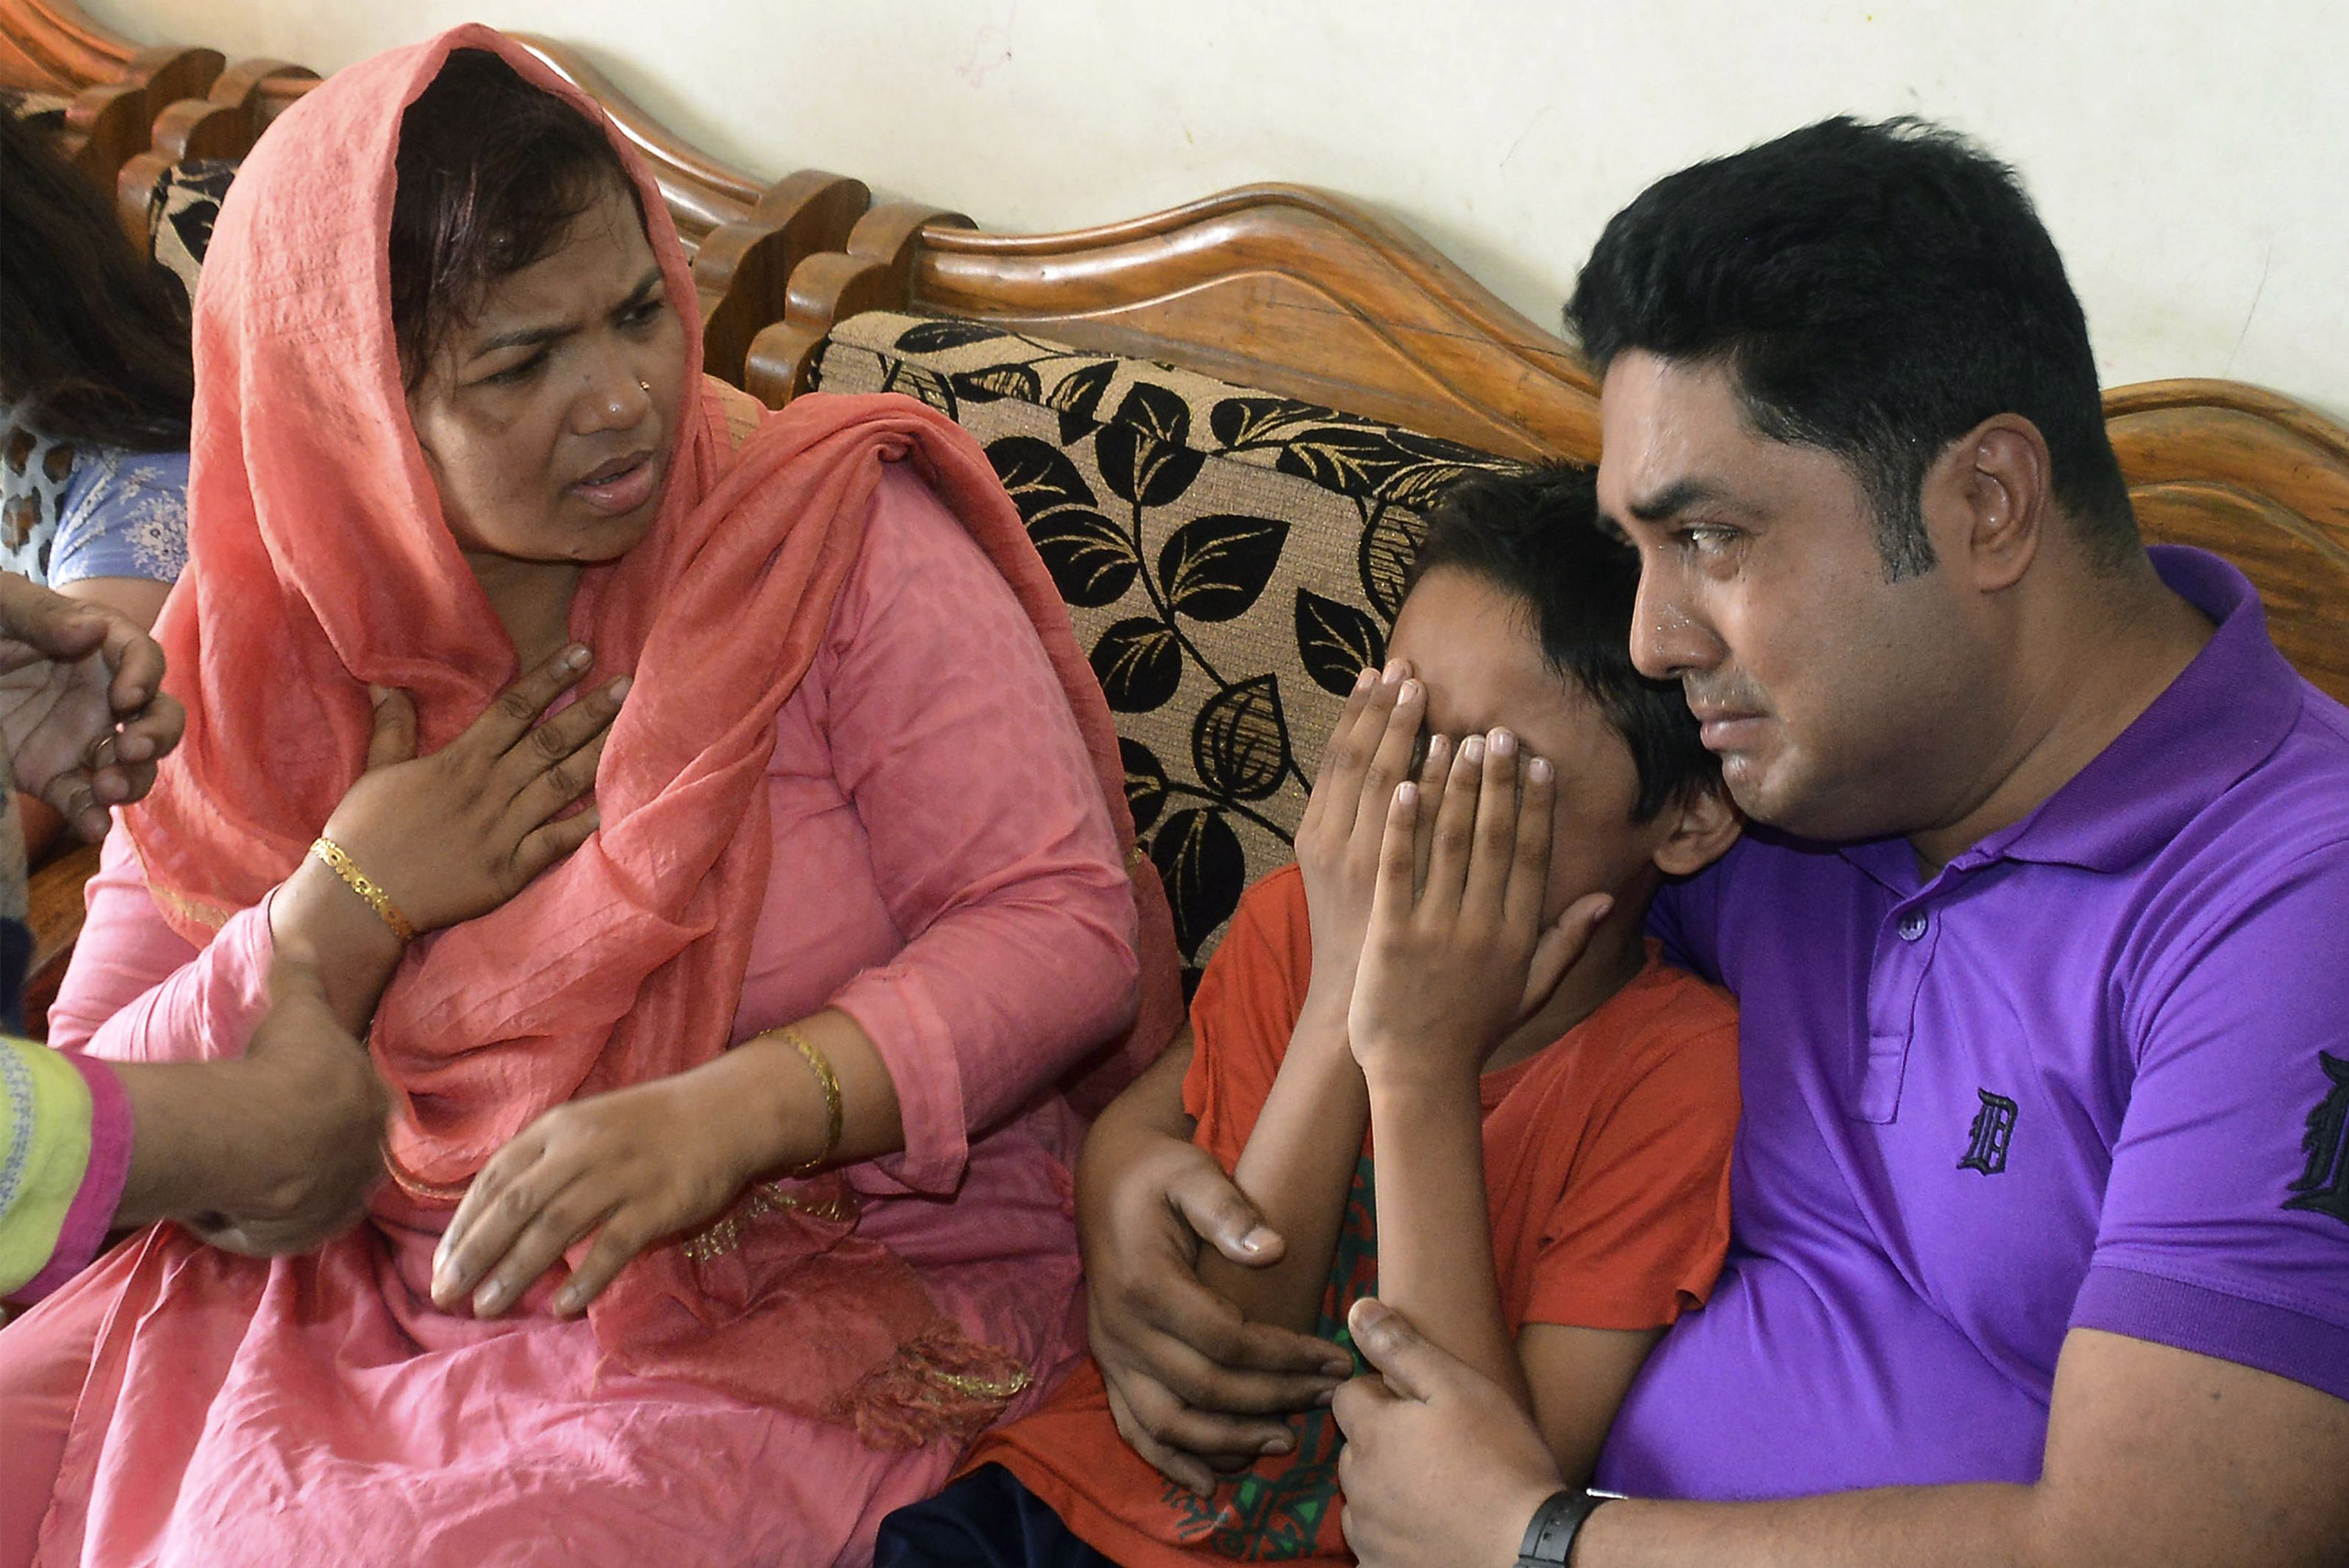 The young son of Mahmuda Aktar, the wife of a top Bangladeshi anti-terror officer,  mourns after she was shot dead near her home in Chittagong on June 5, 2016. (AFP/Getty Images)